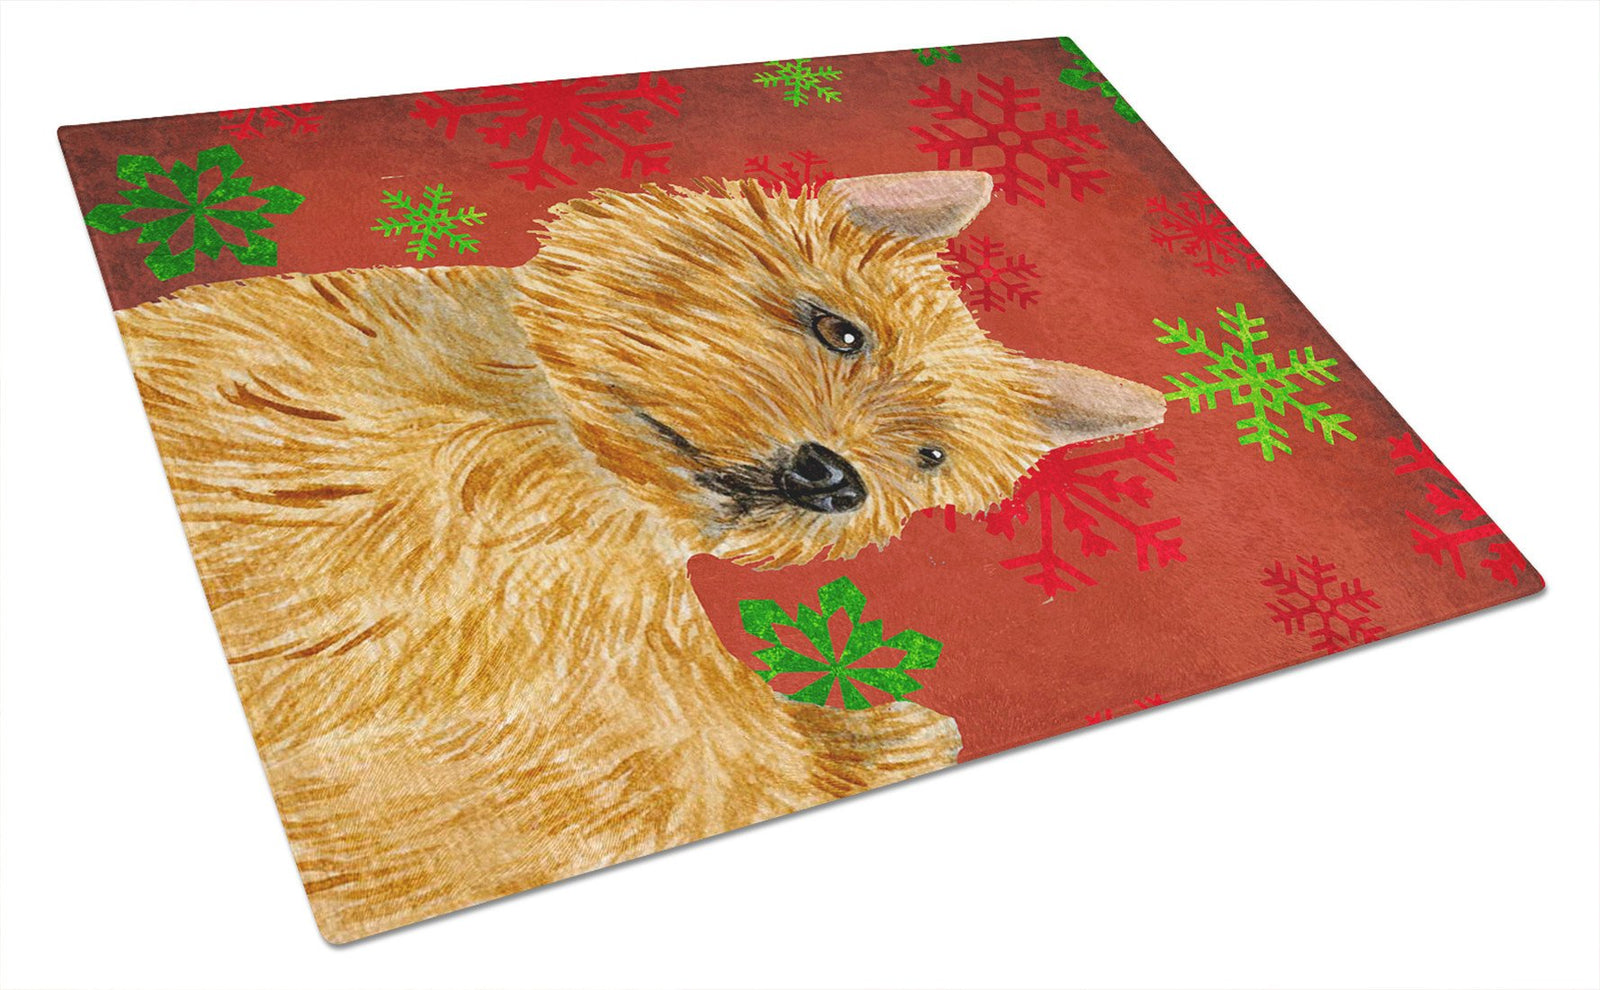 Norwich Terrier Red and Green Snowflakes Christmas Glass Cutting Board Large by Caroline's Treasures